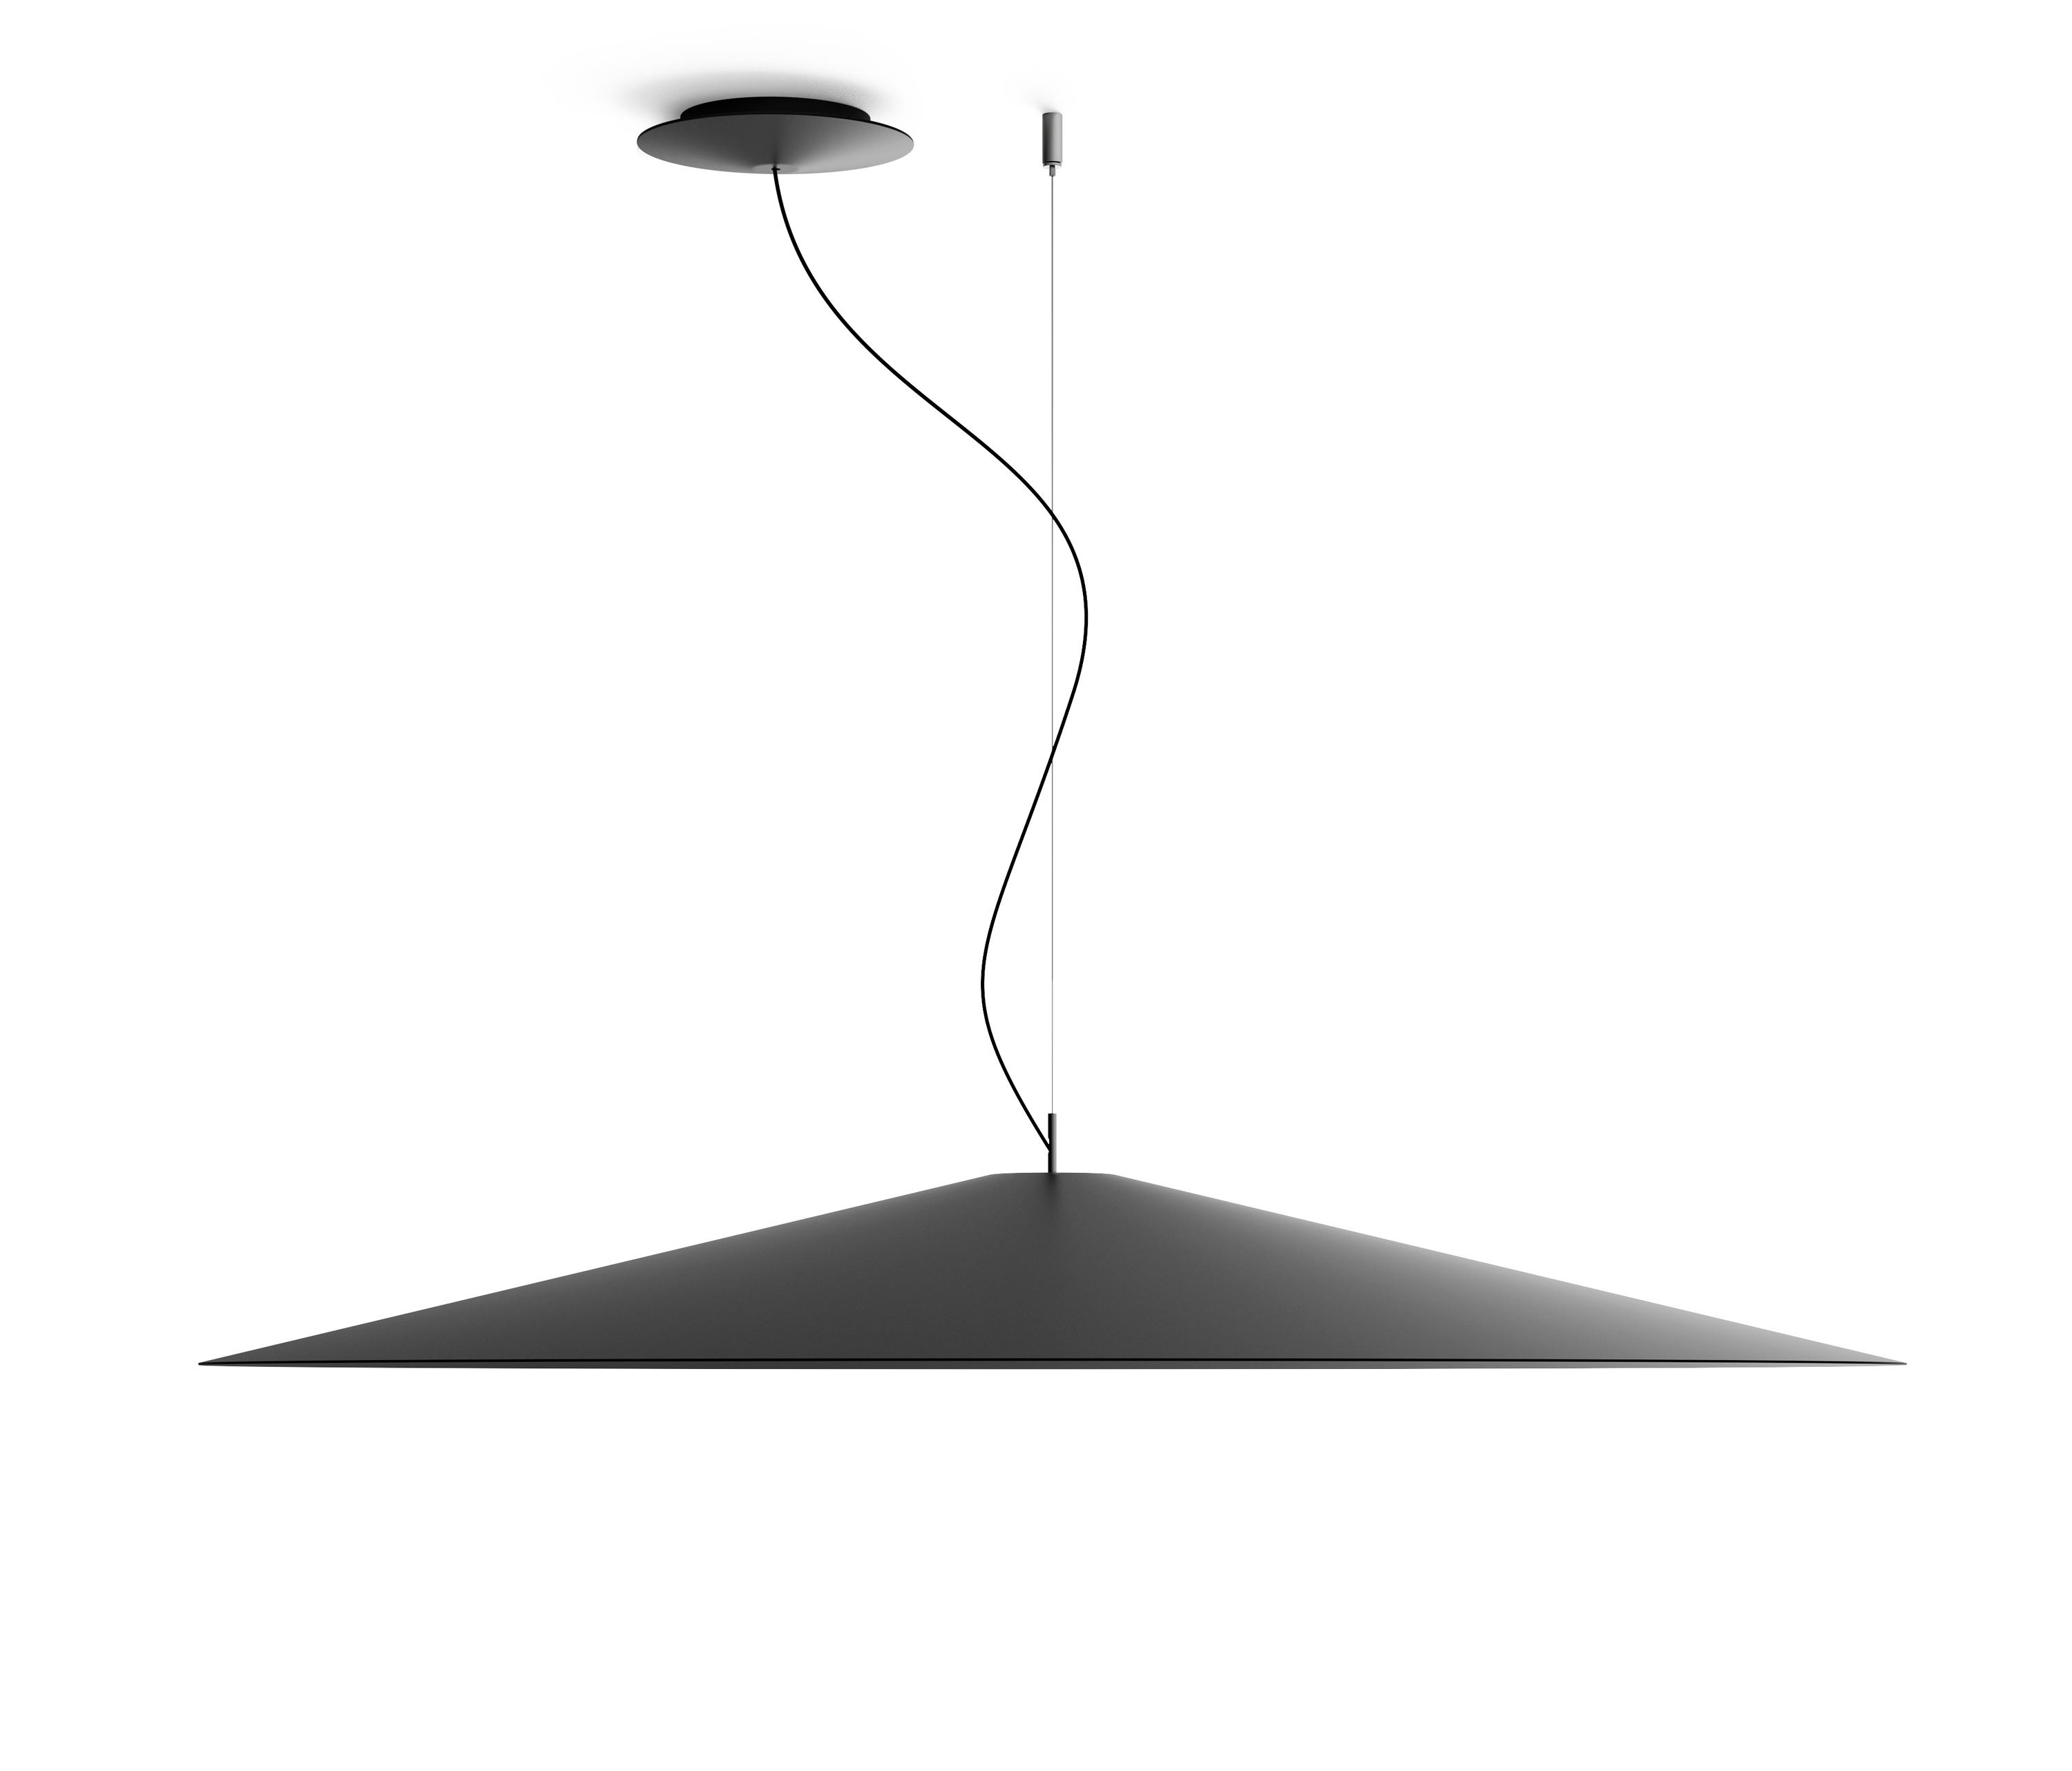 KOINè - Suspended lights from LUCEPLAN | Architonic